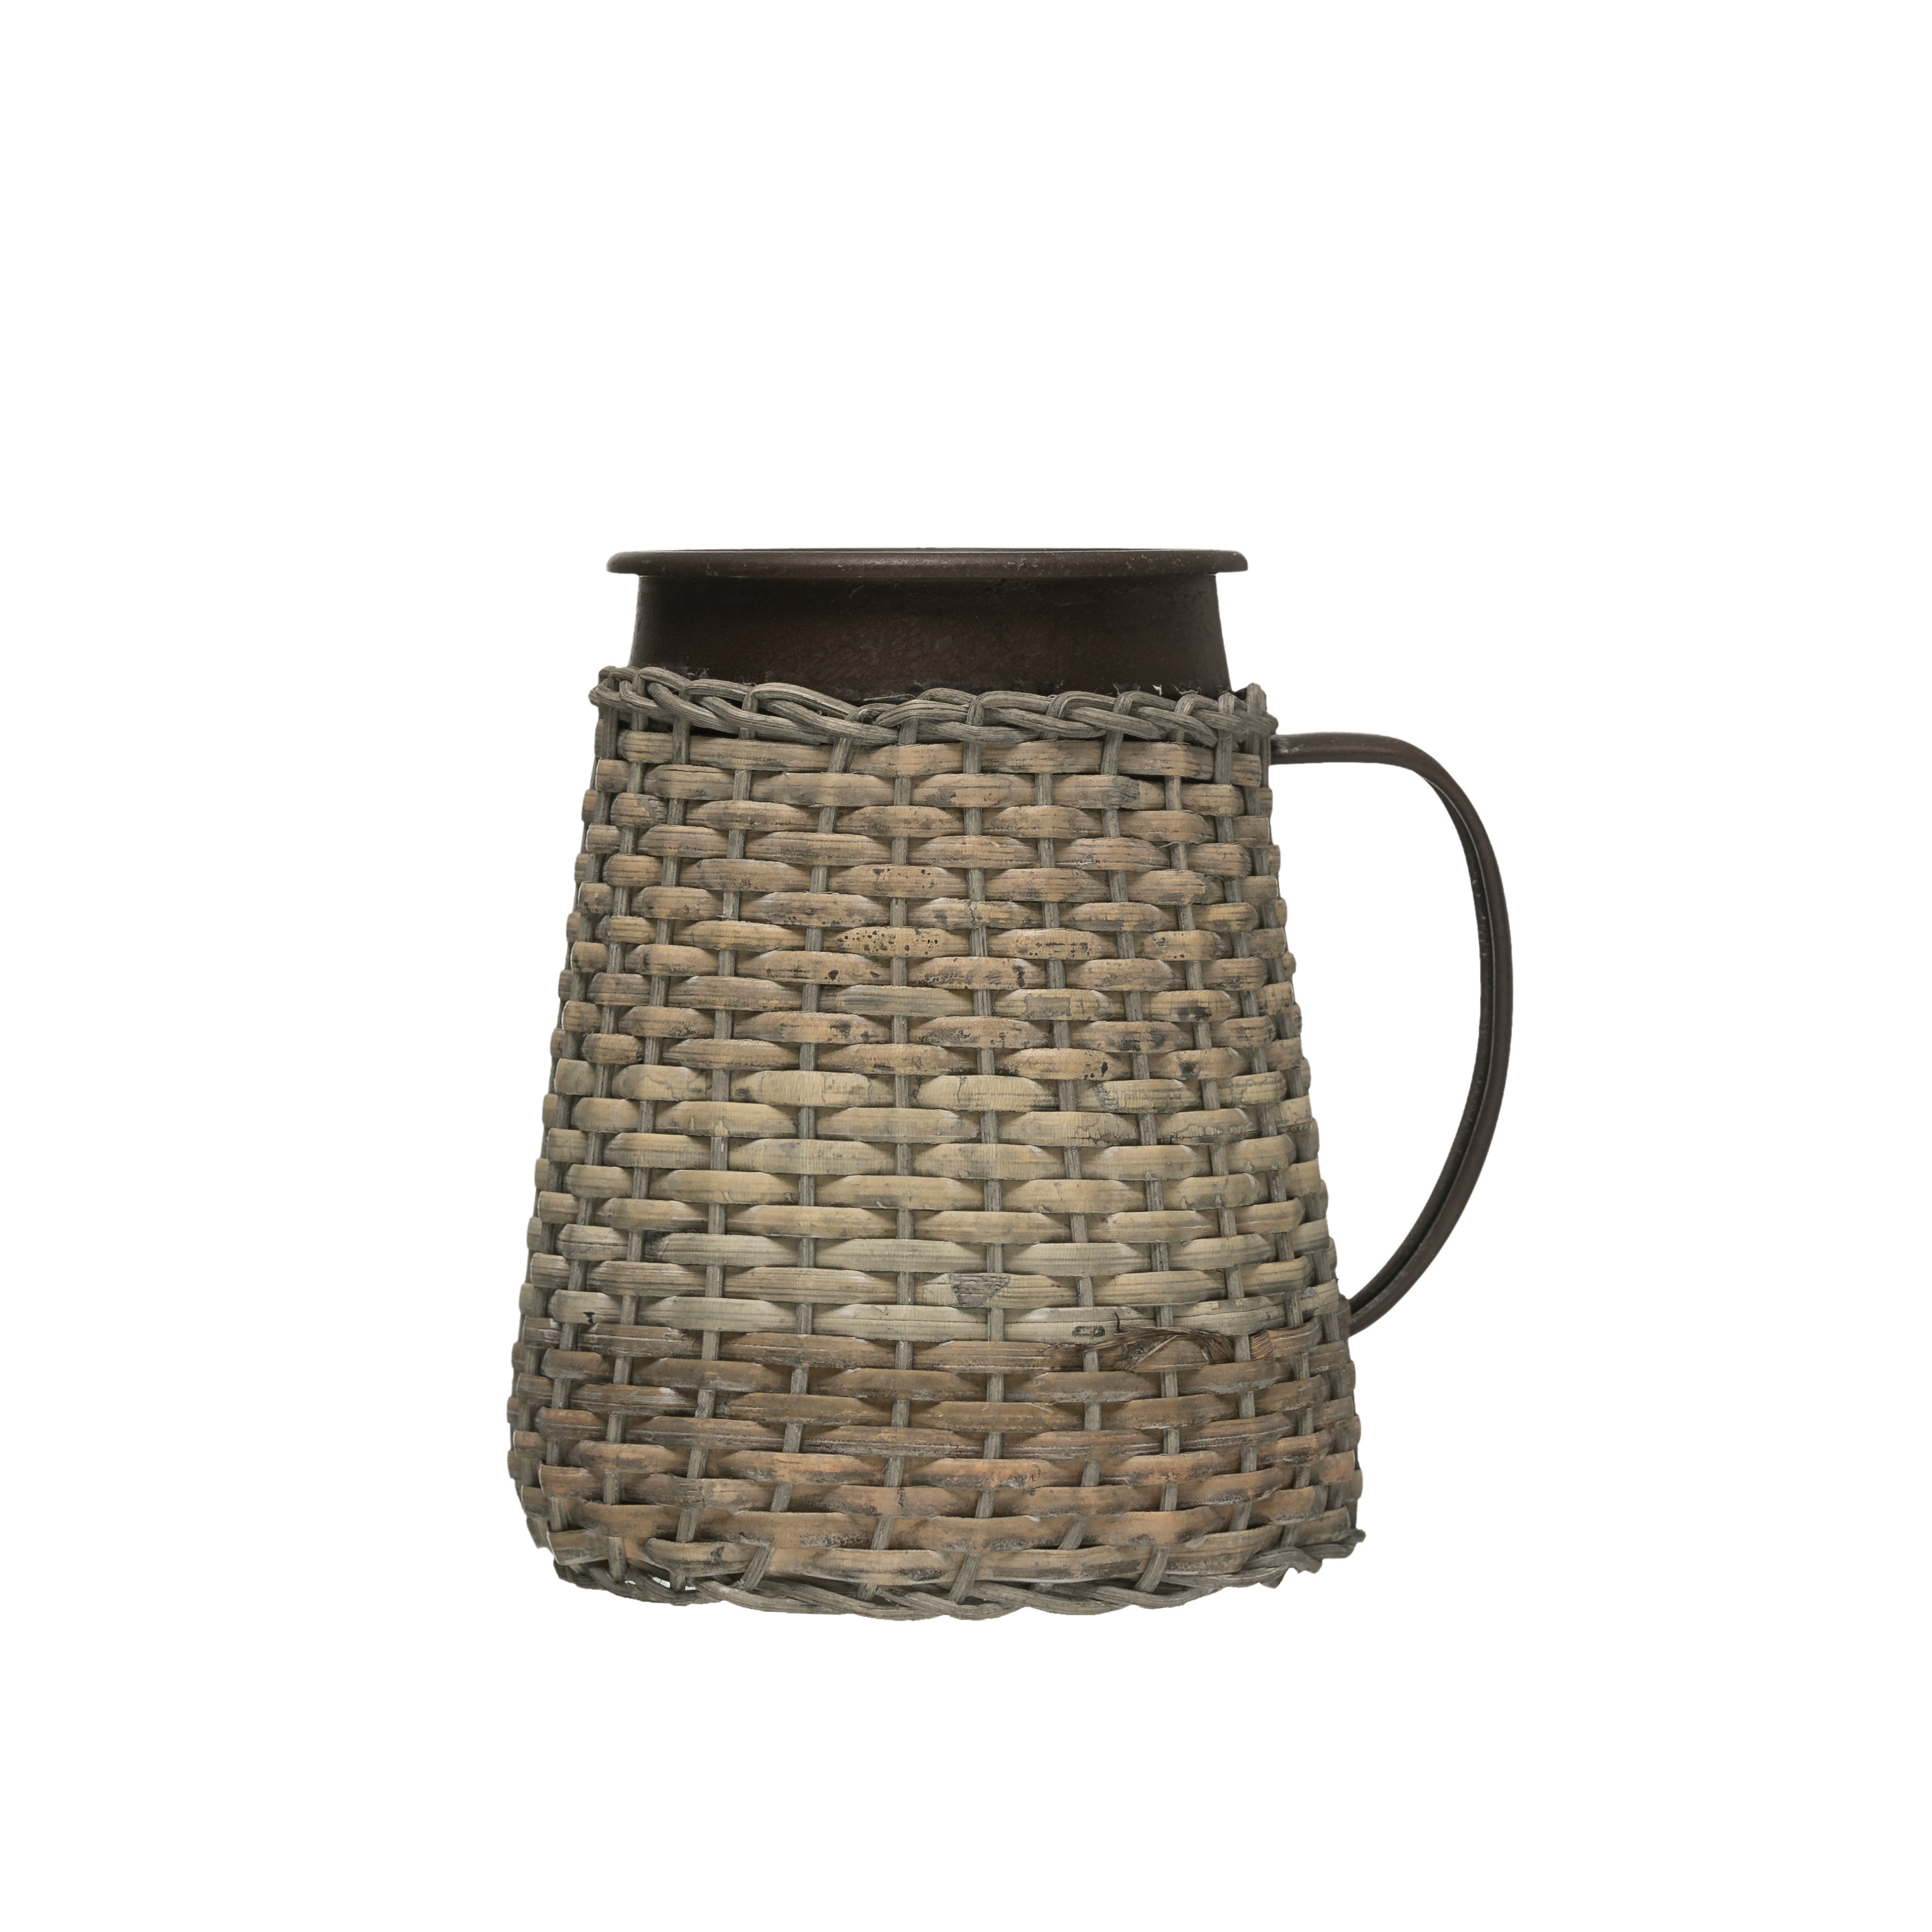 7"H Decorative Metal Pitcher with Woven Rattan Sleeve - Moss & Wilder